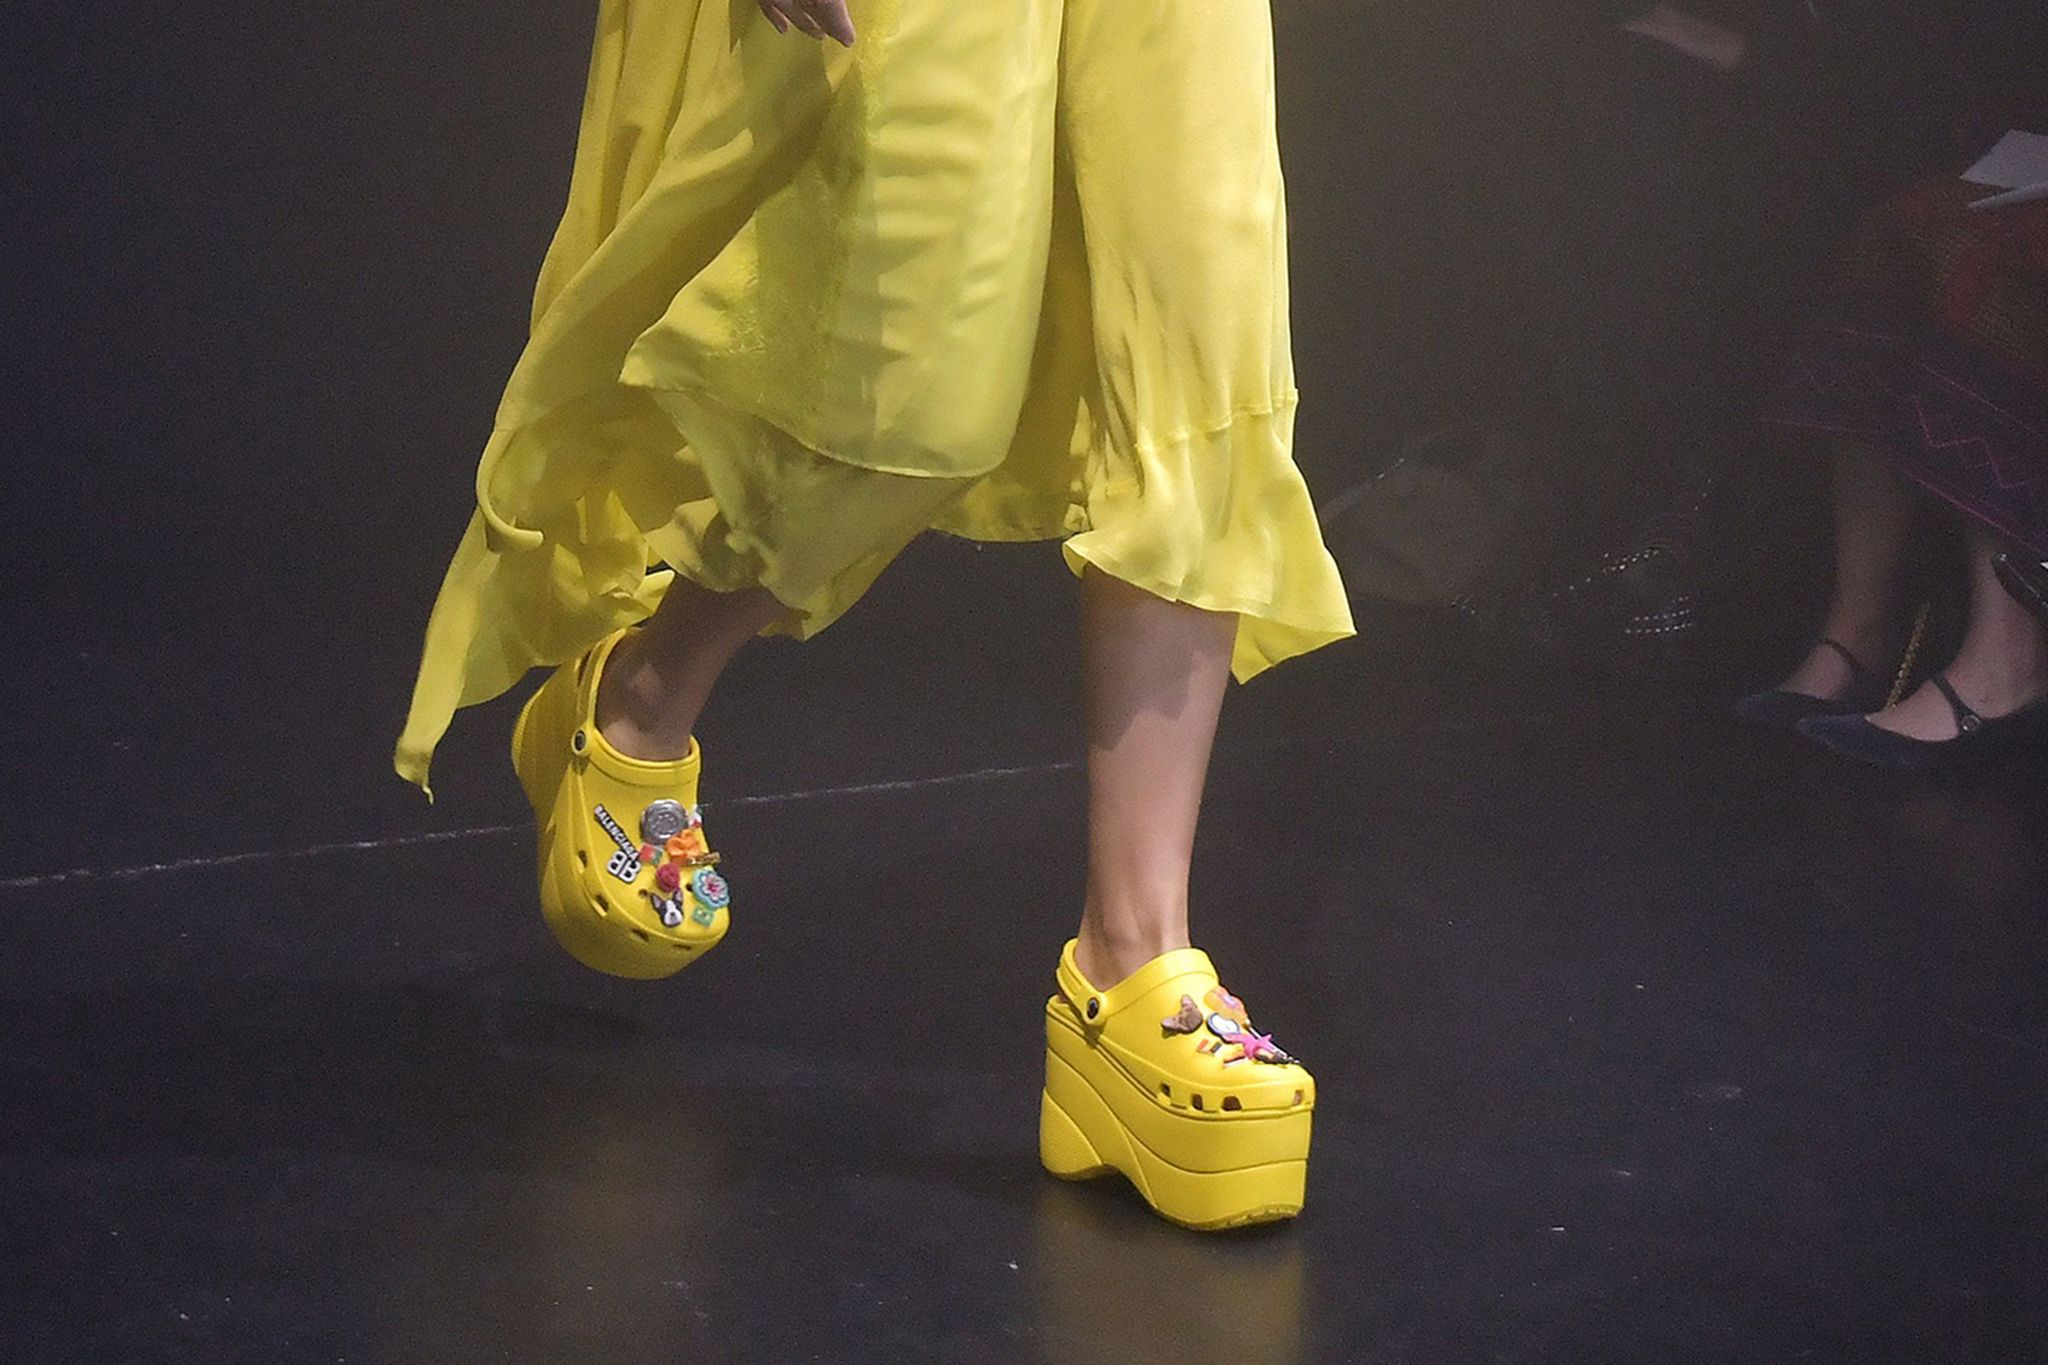 Balenciaga's £600 platform Crocs sold out before they were even released